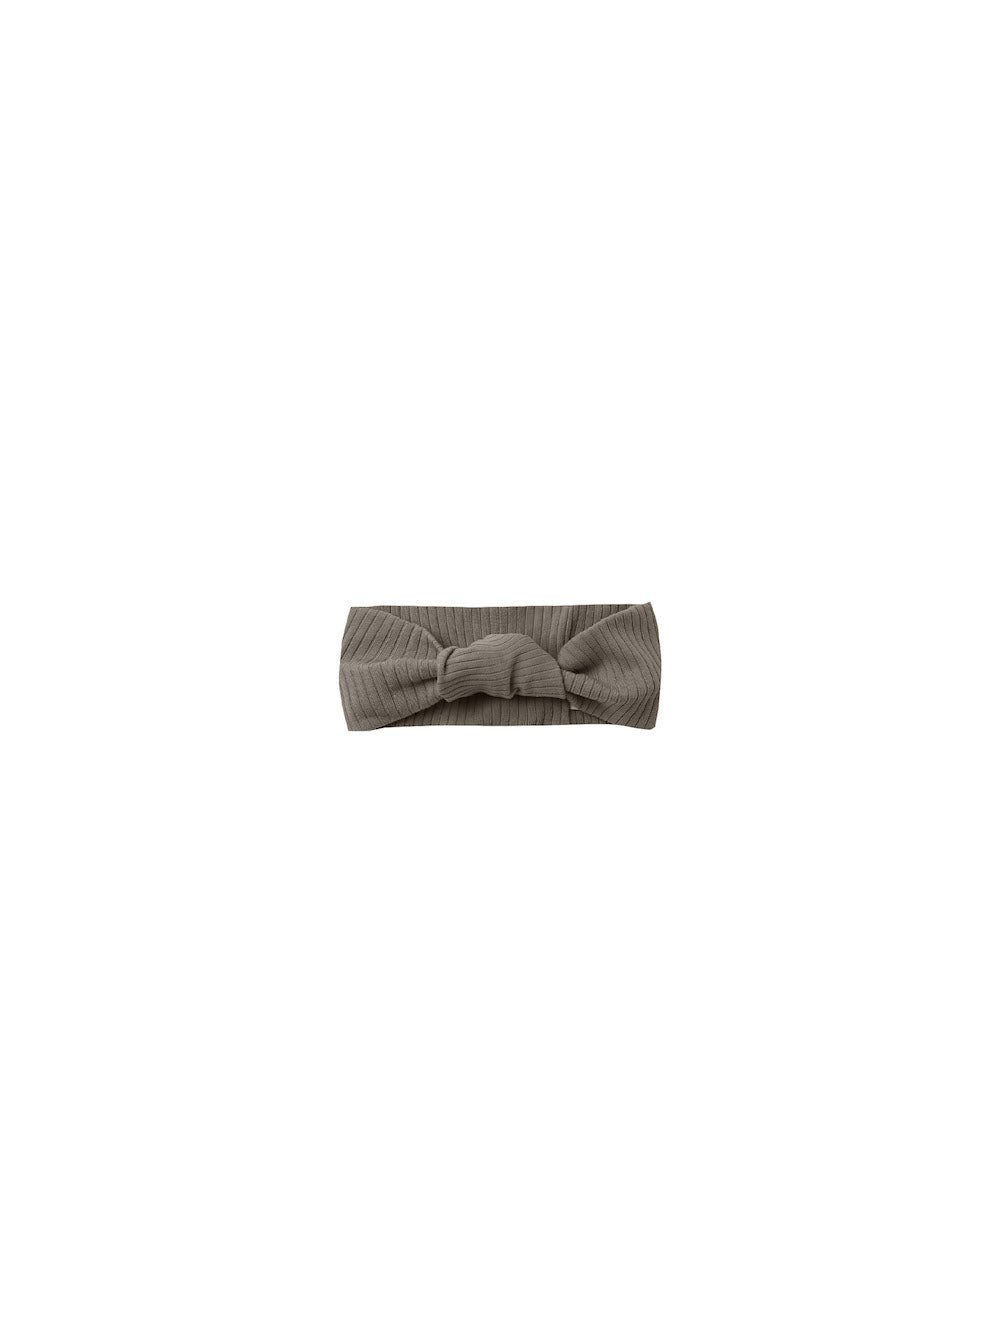 Quincy Mae Ribbed Knotted Headband - Charcoal